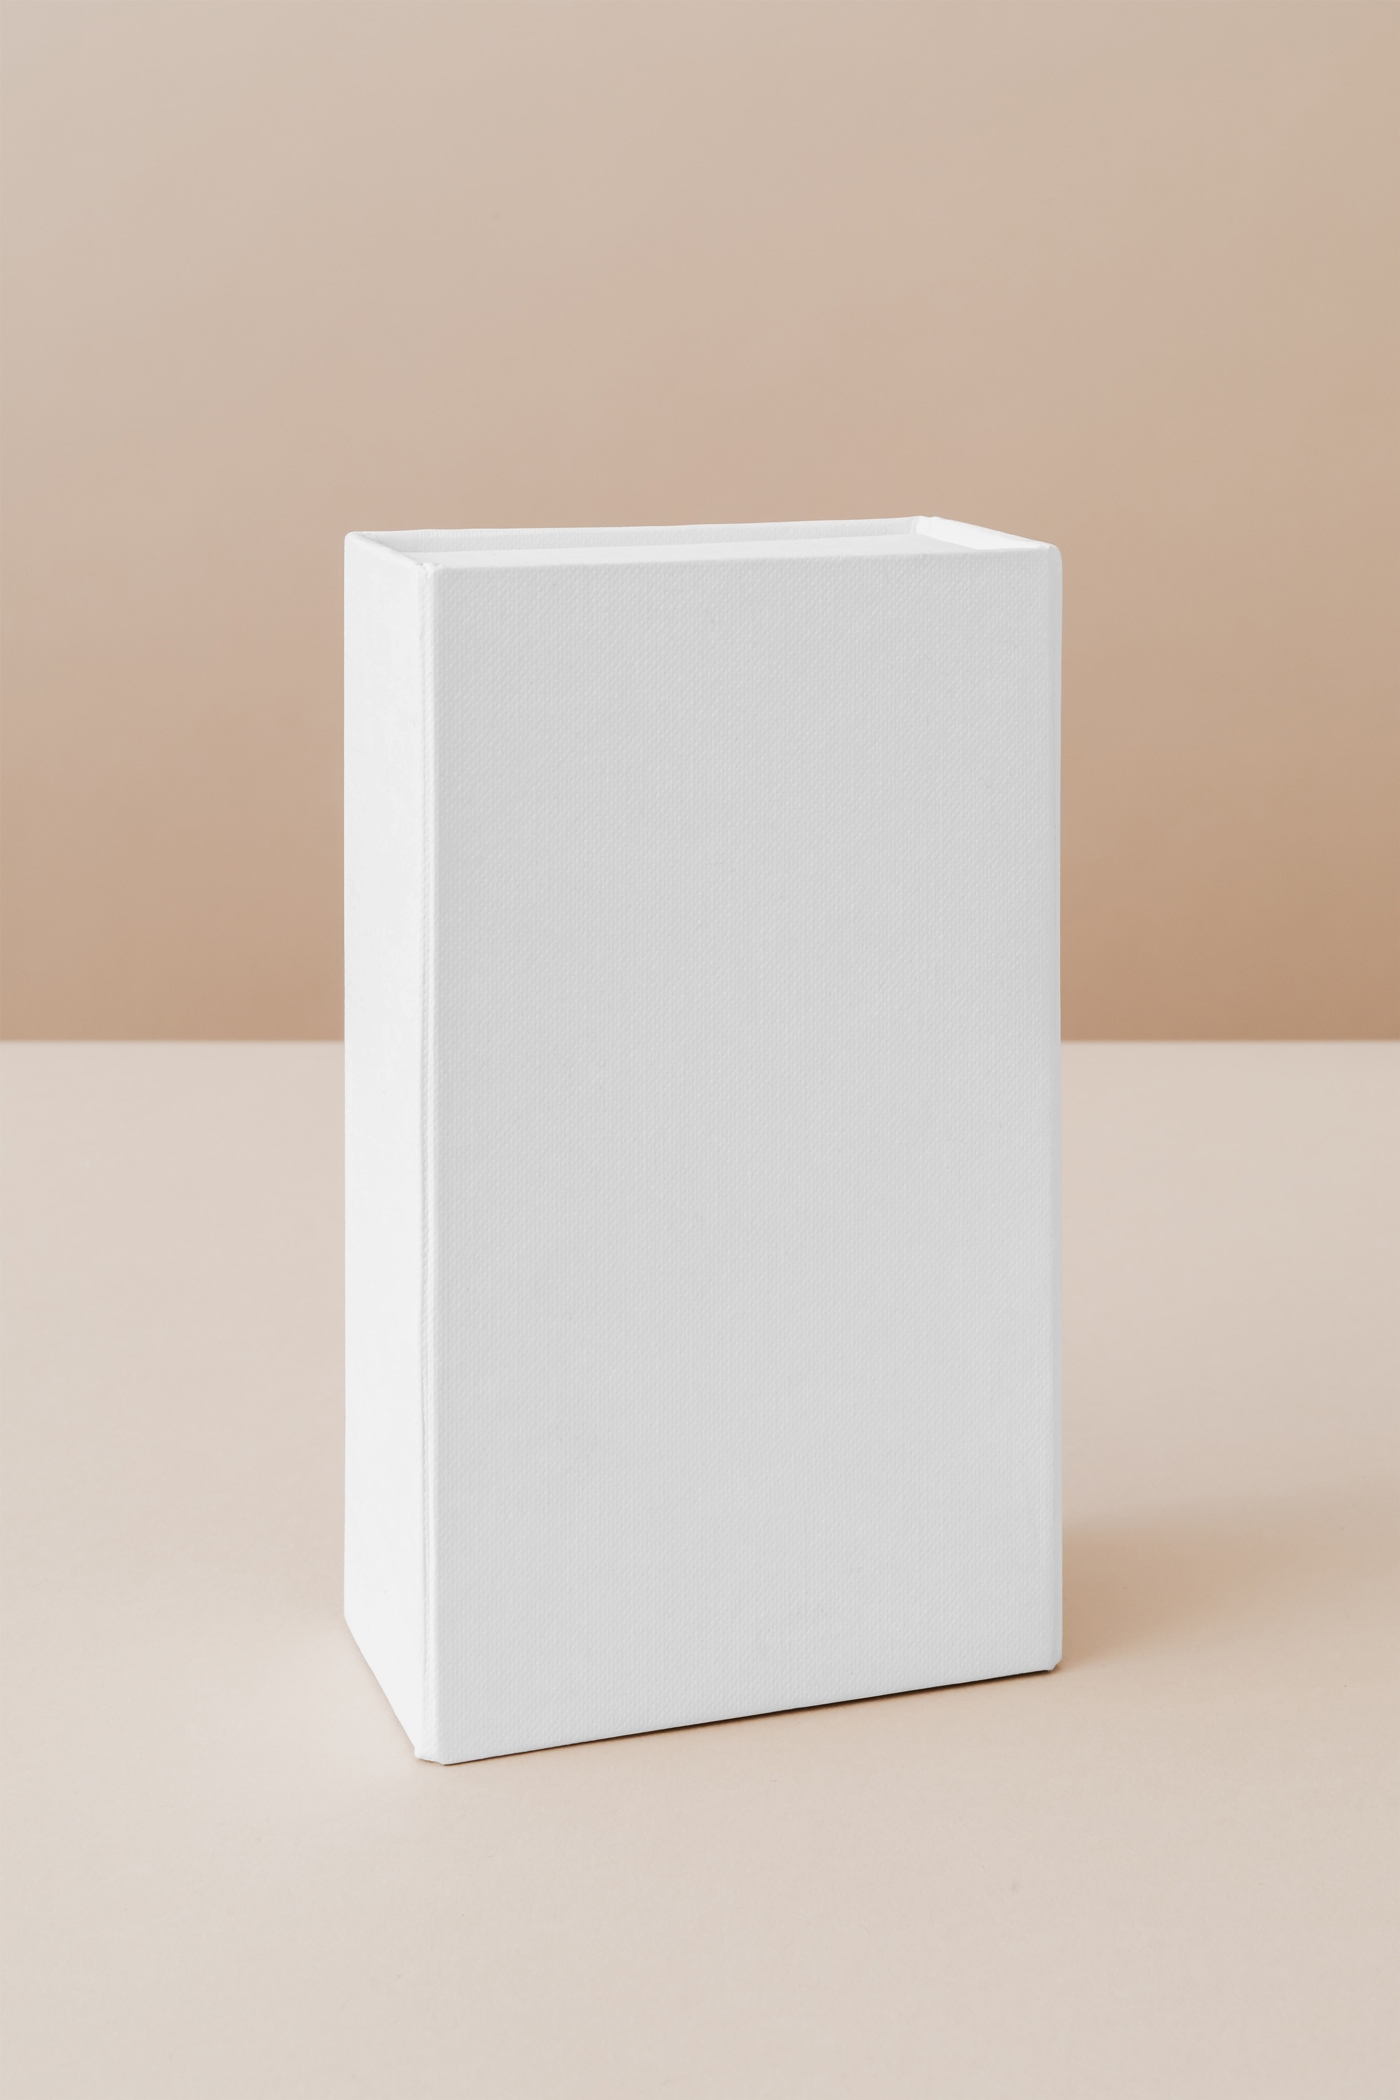 Perspective View of Vertical Standing Box Mockup FREE PSD